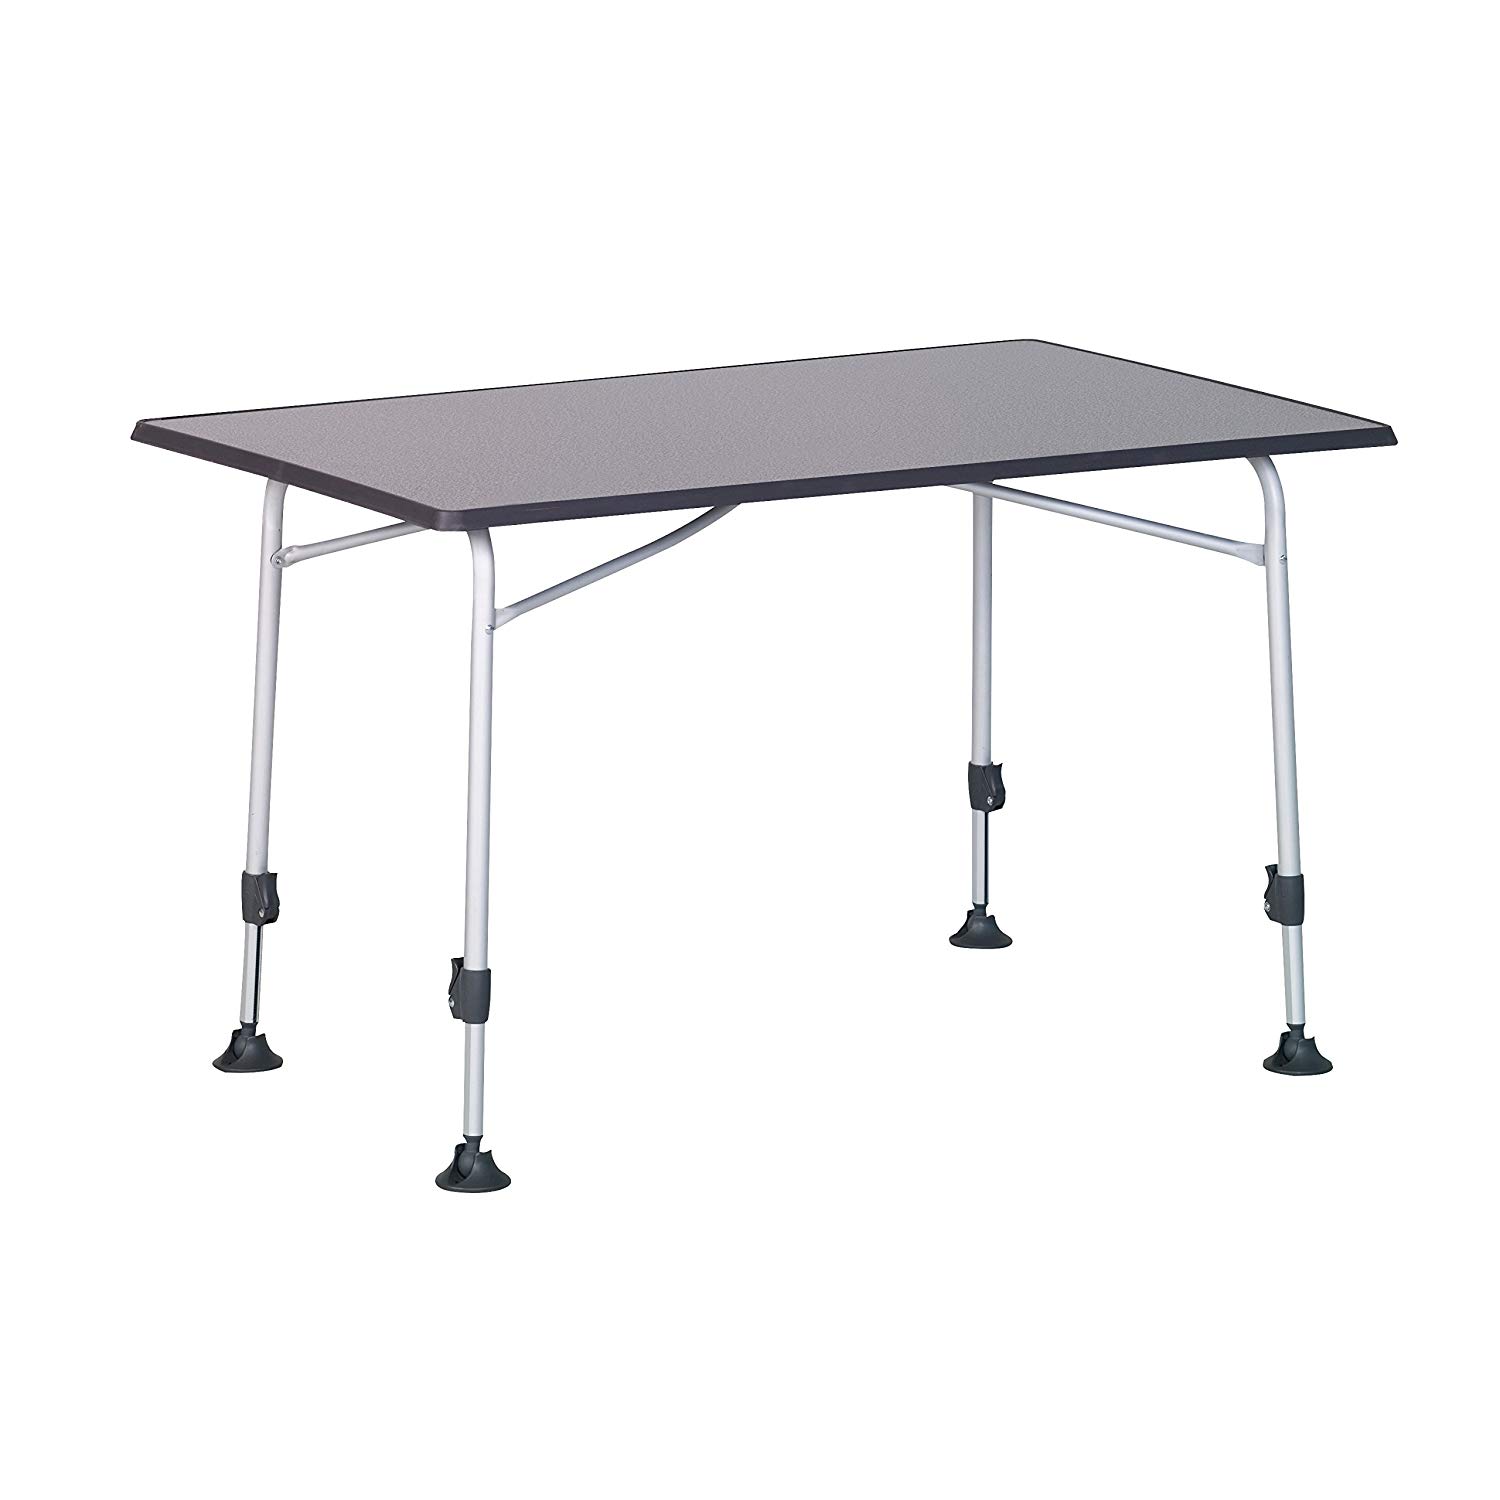 Westfield Viper 115 926876, Table (gray) 301-2019 (4260182767986)